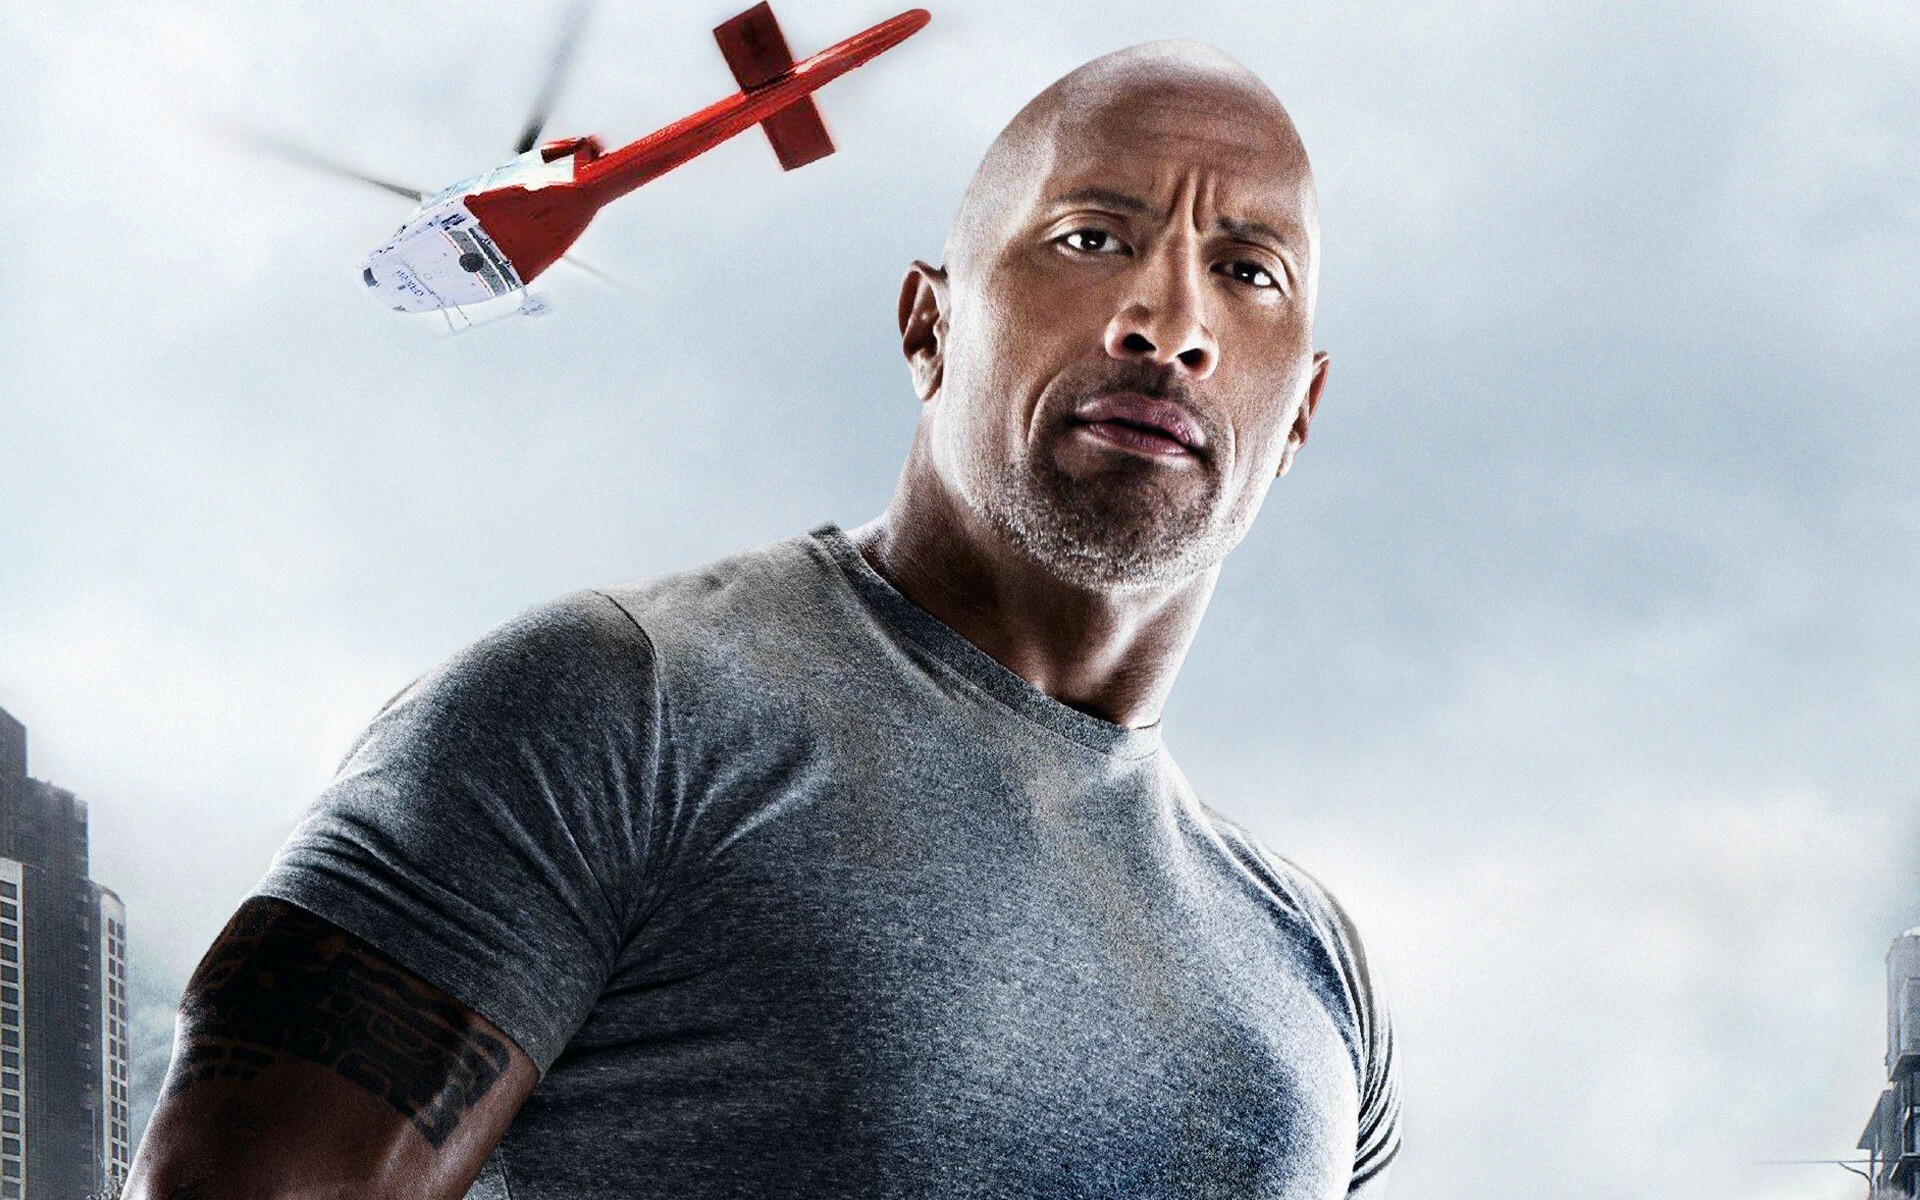 Dwayne Johnson: Starred as Raymond Gaines in the San Andreas movie. 1920x1200 HD Wallpaper.